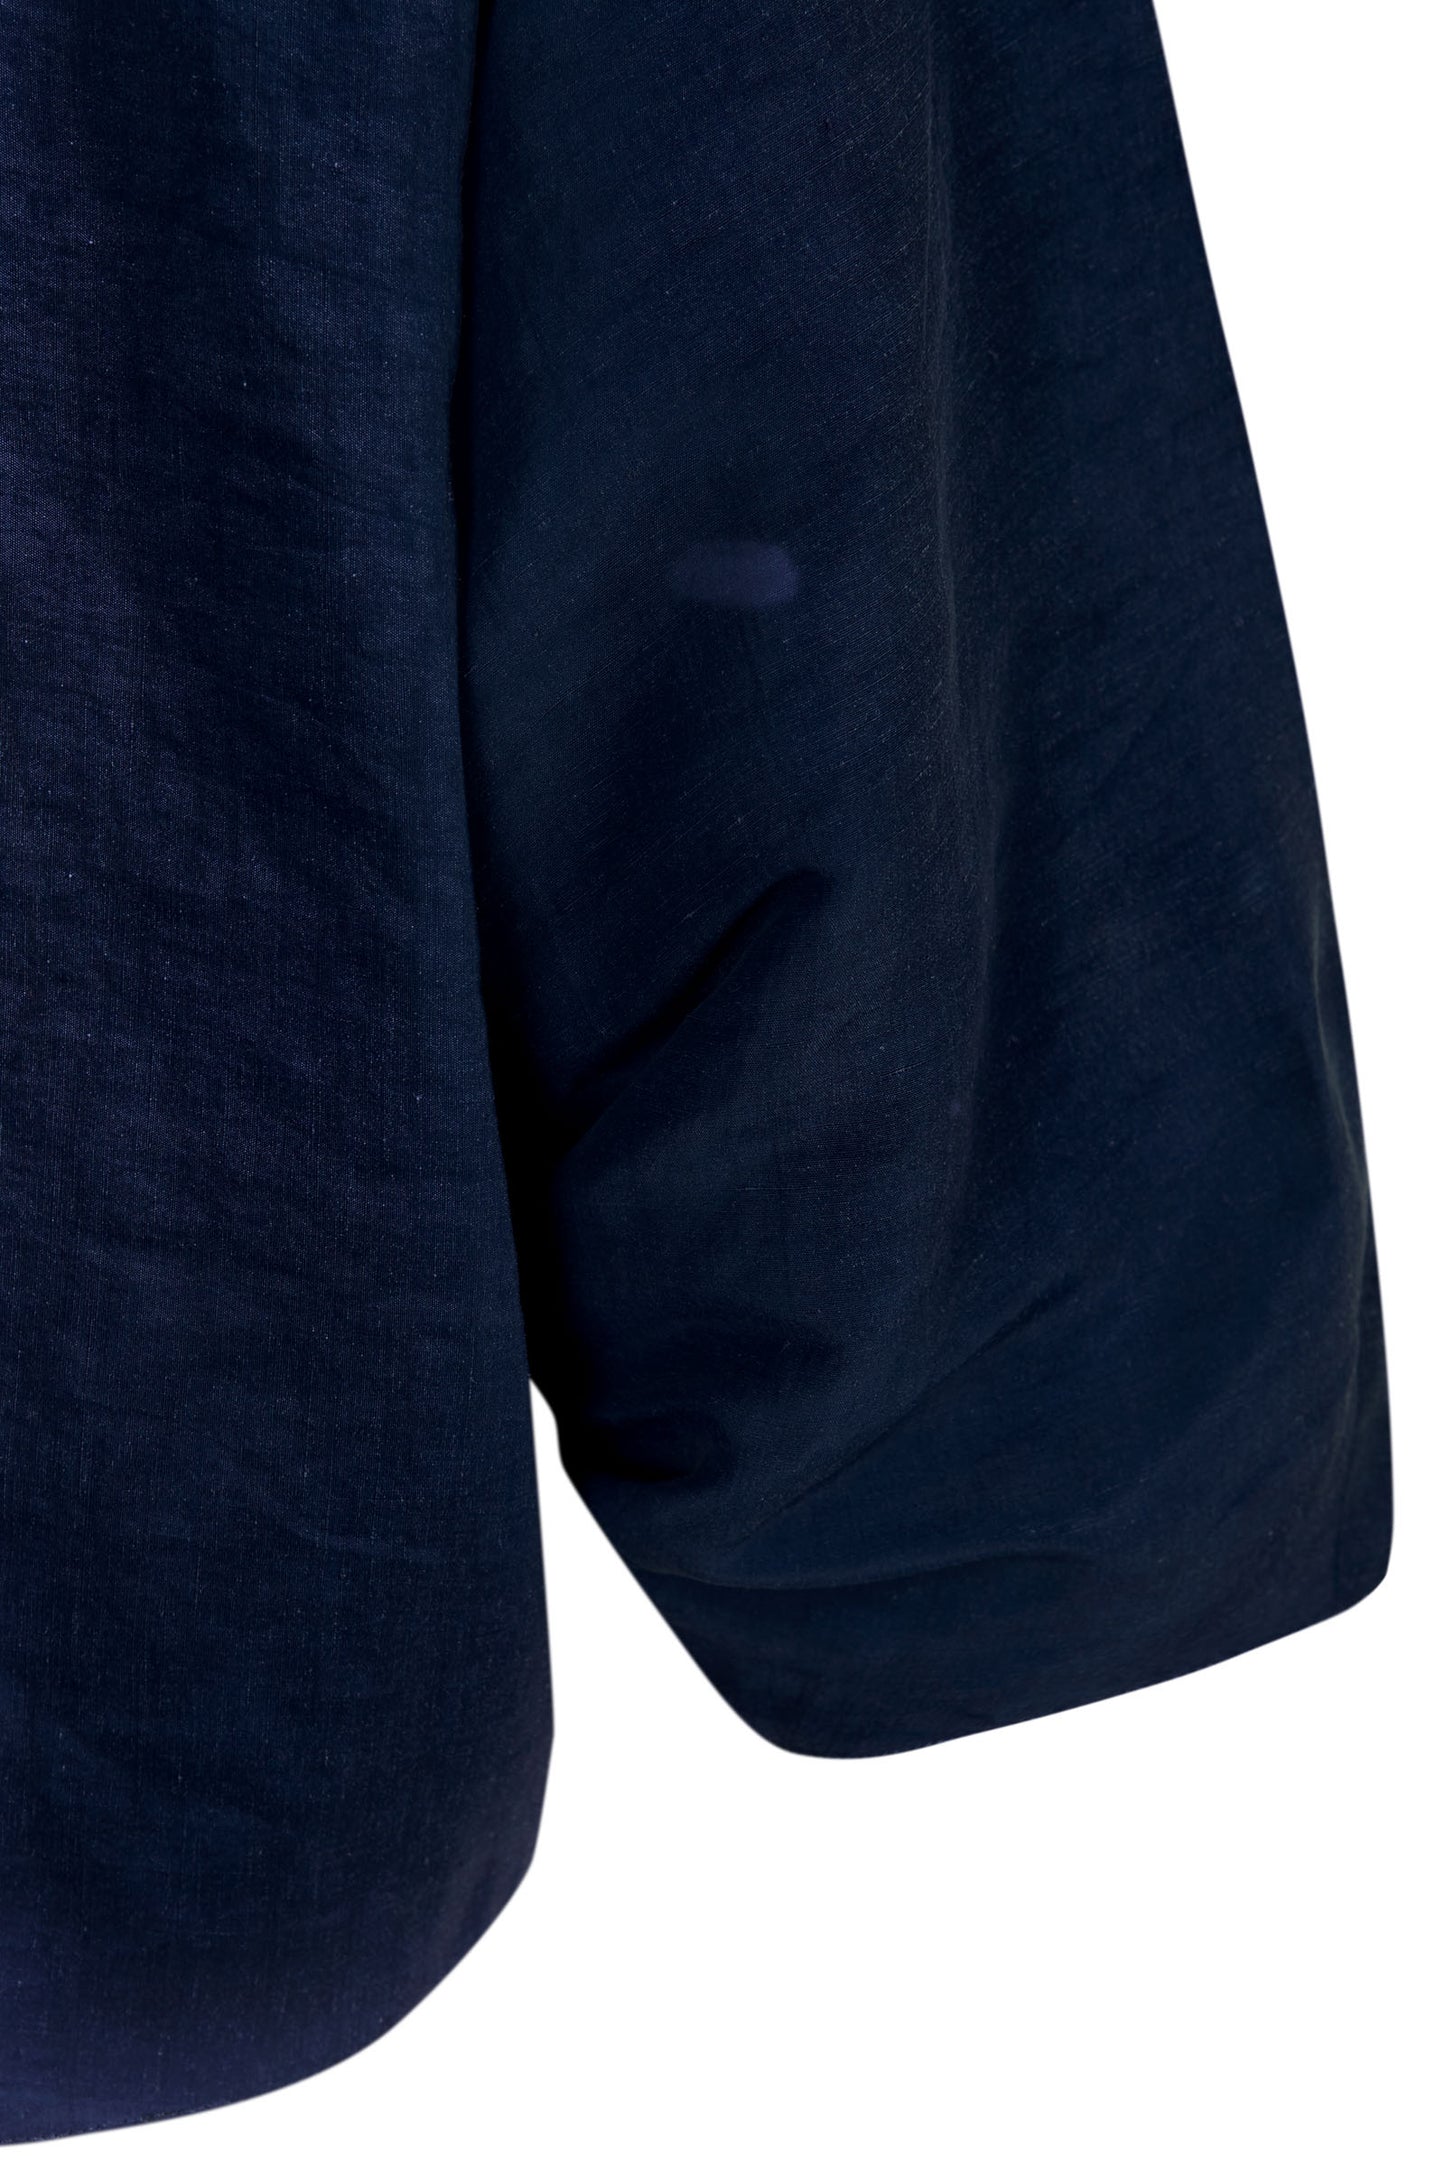 Arco, jacket in deep blue linen and cupro